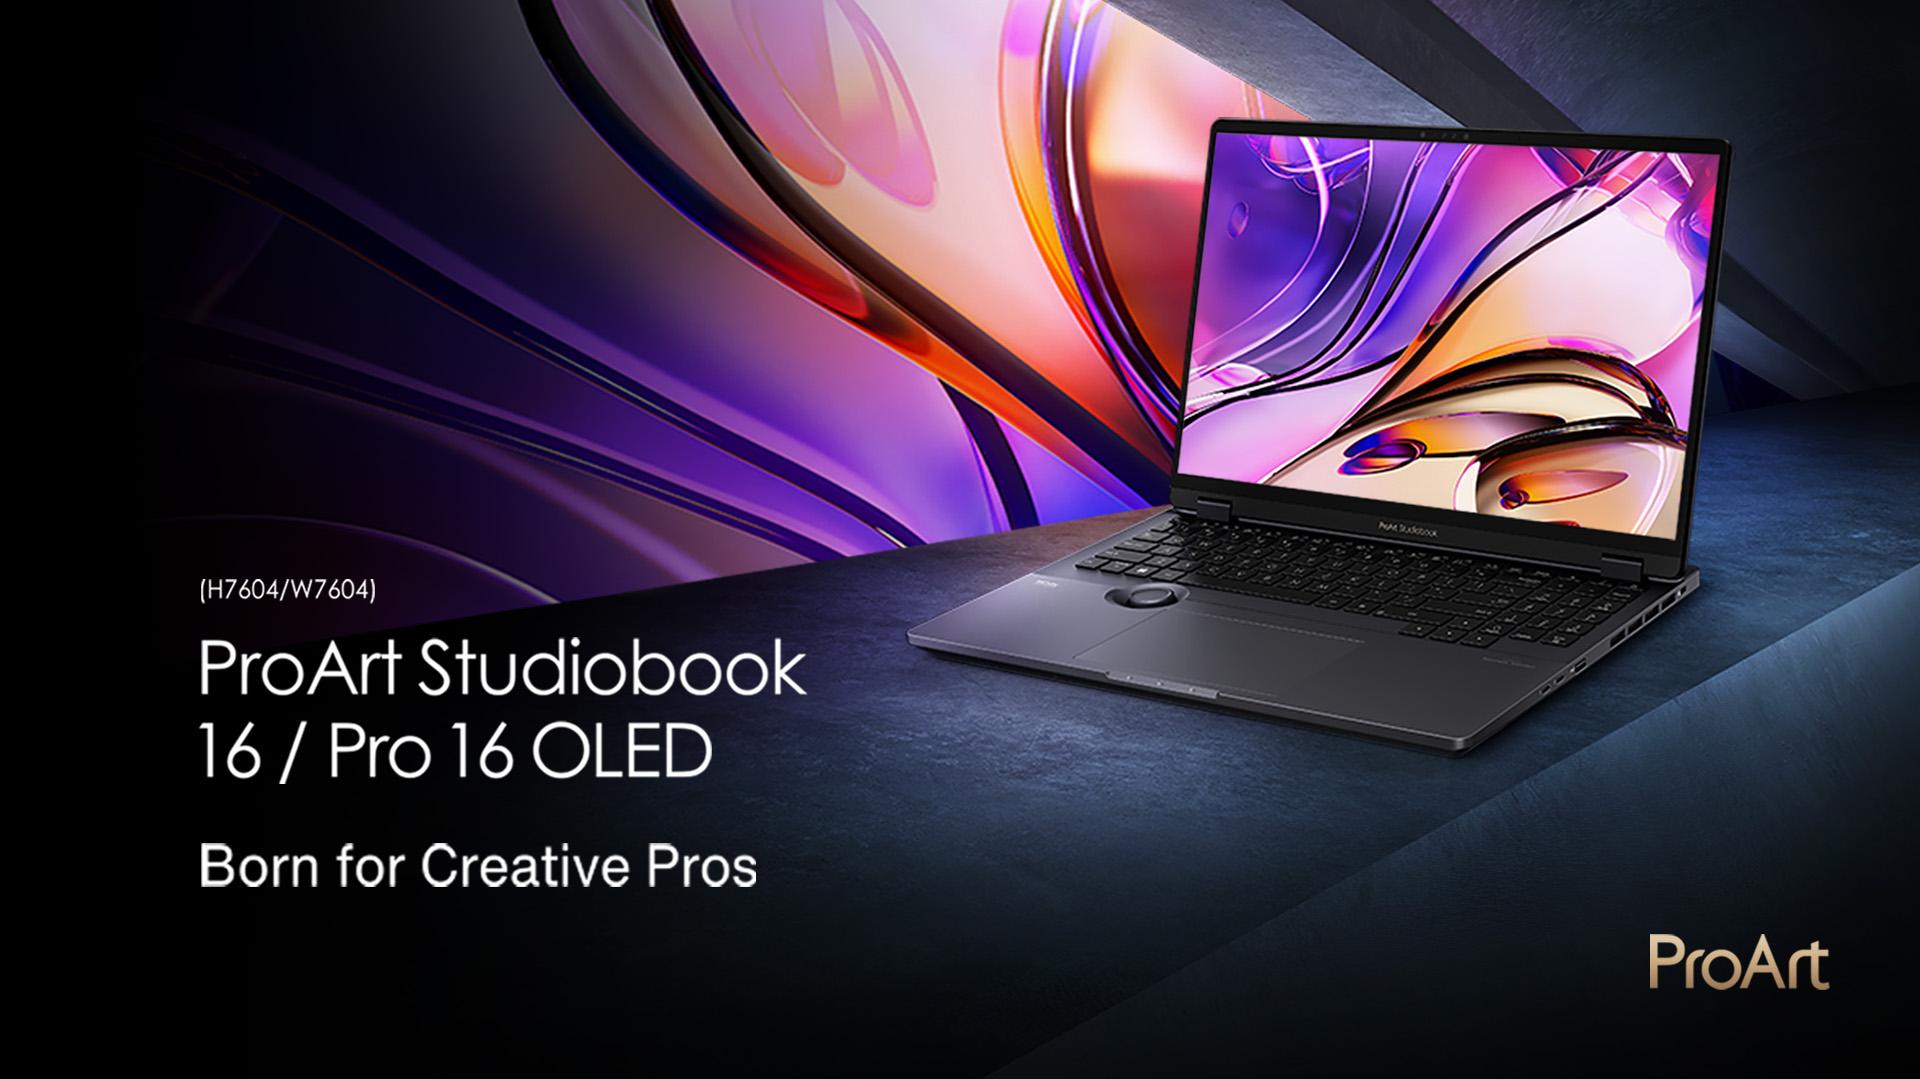 Asus On X Introducing The New Proart Studiobook Pro